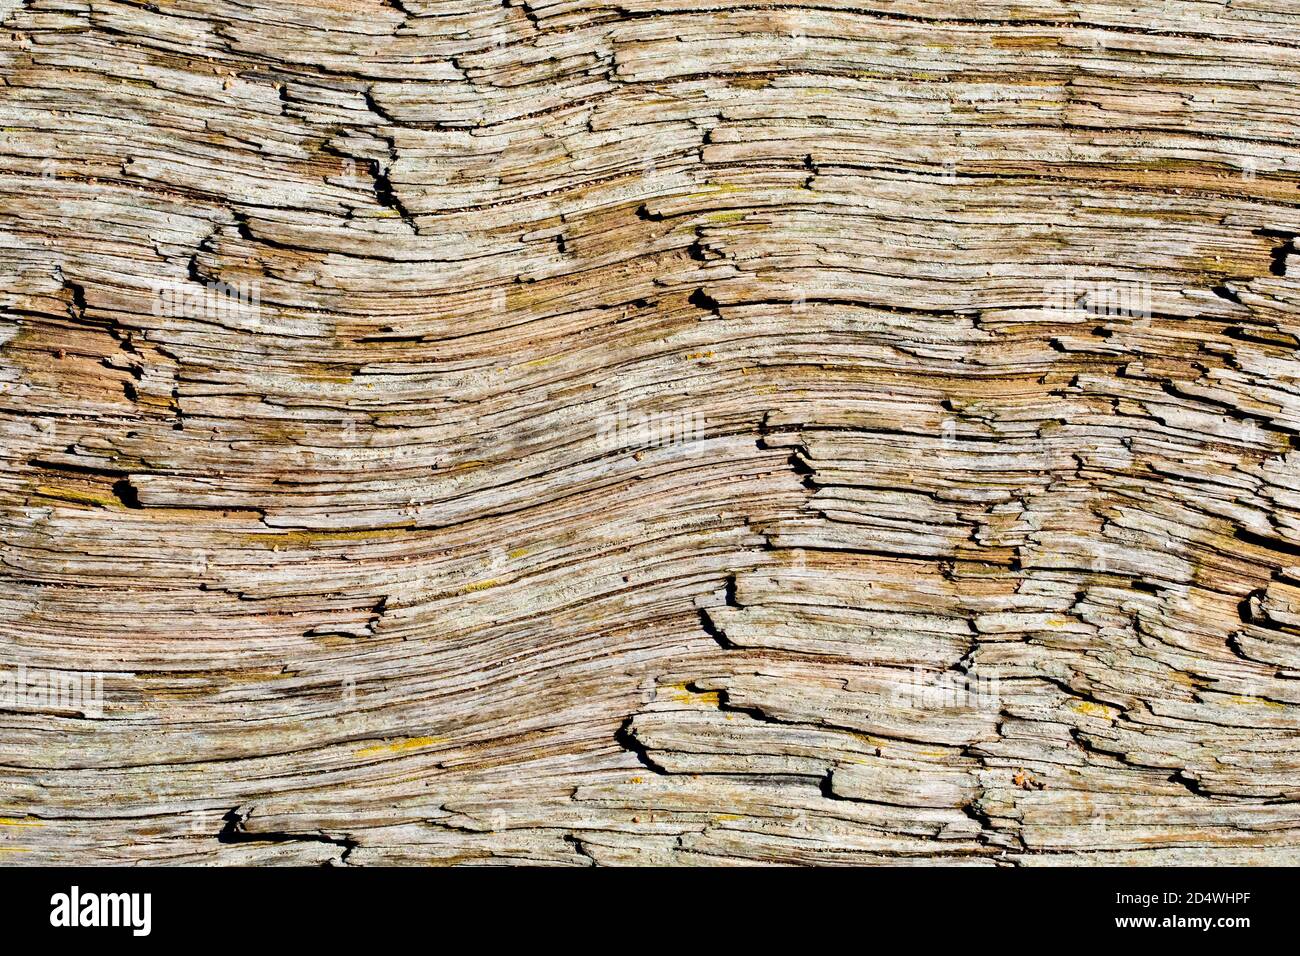 A close up image of the coarse grain pattern in a plank of wood found washed up on the beach. Stock Photo